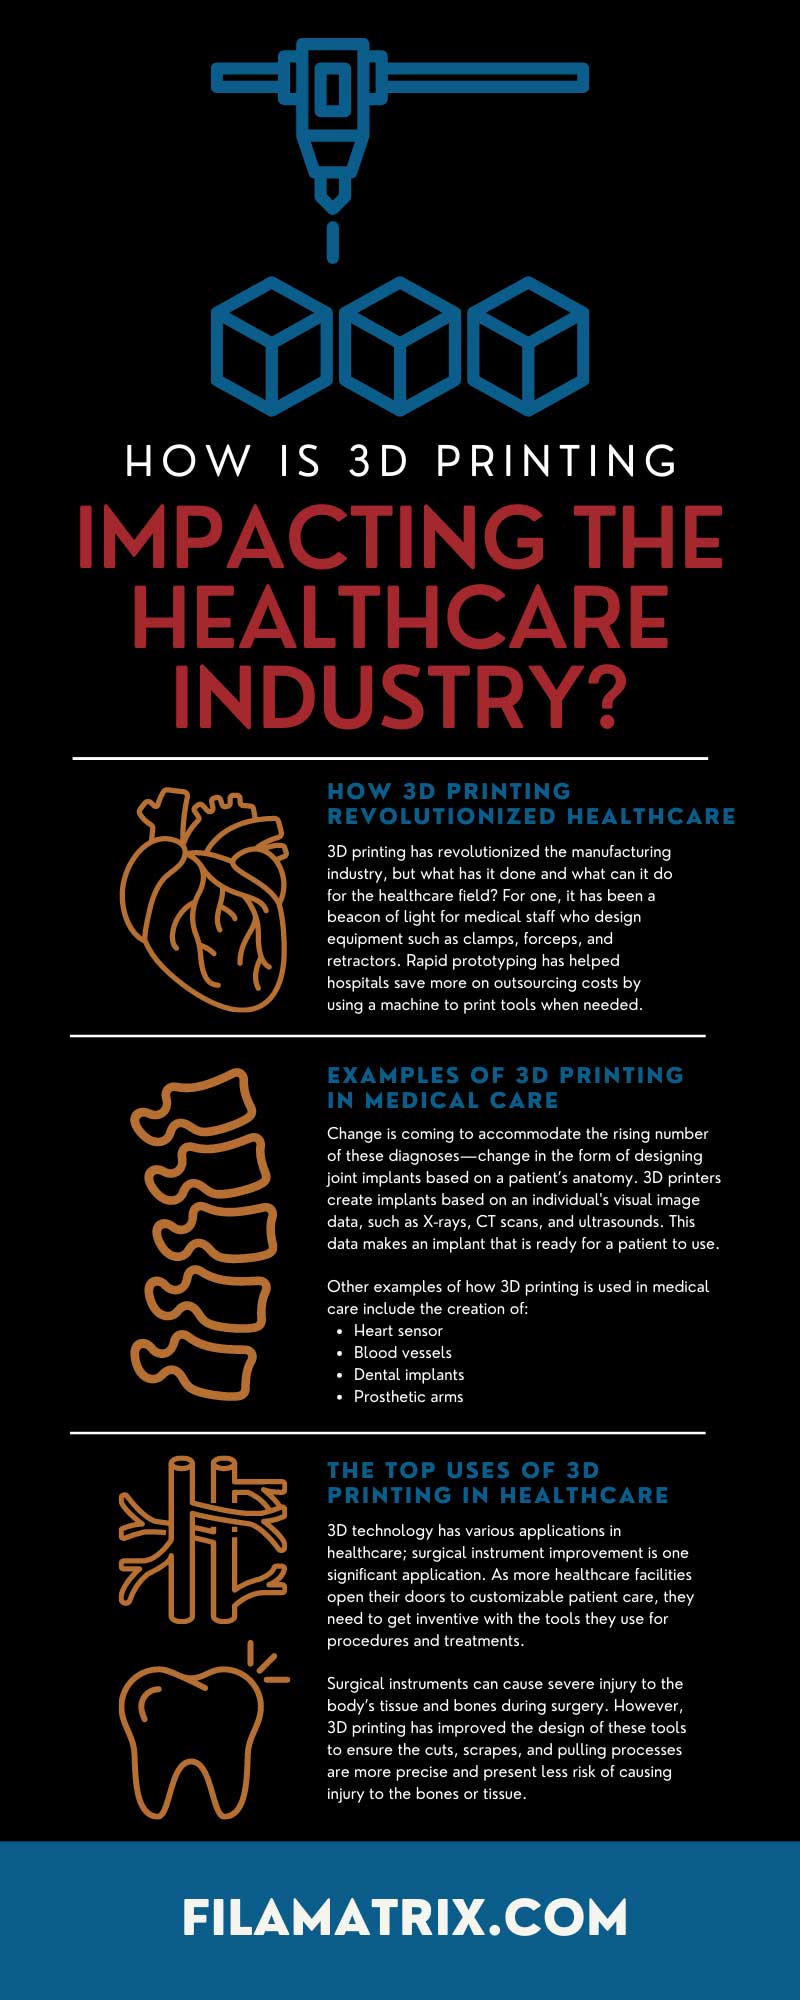 How Is 3D Printing Impacting the Healthcare Industry?